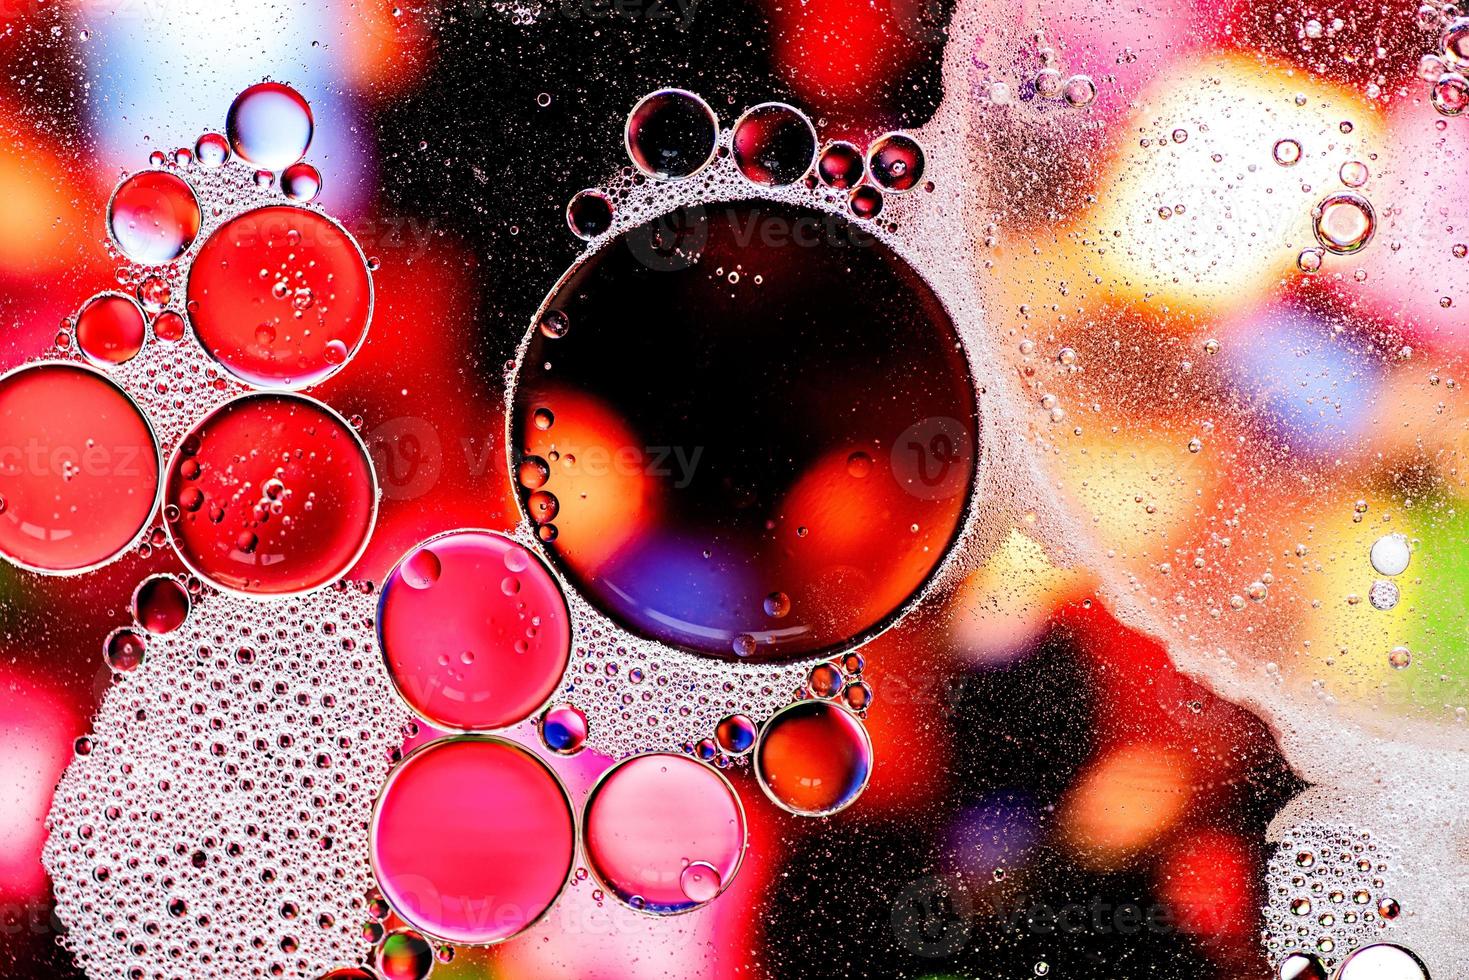 Pink and purple abstract pattern made with oil bubbles on water photo